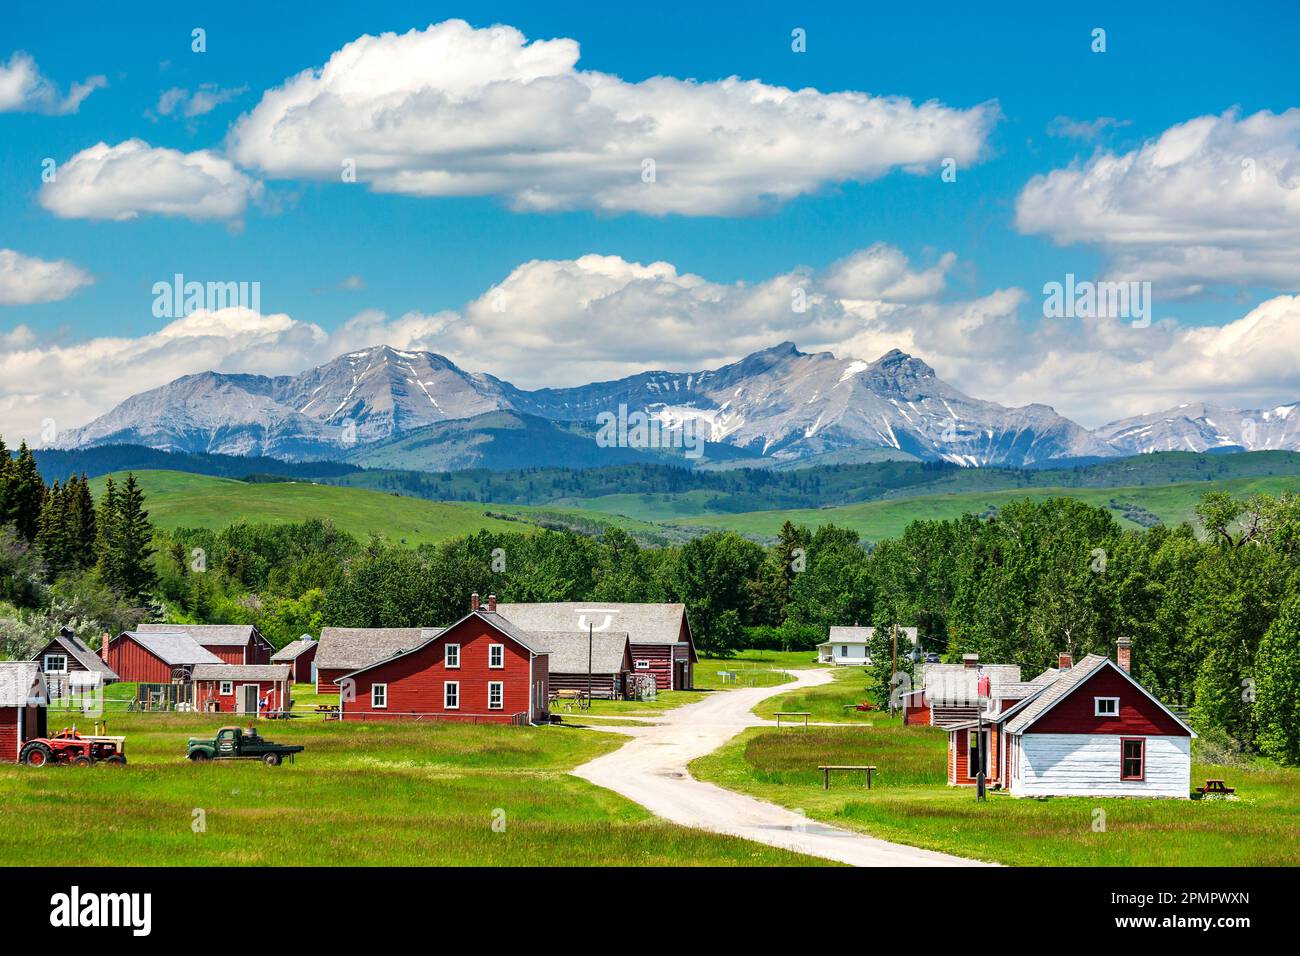 Historical site with red painted buildings, foothills, mountains, blue sky and clouds in the background, South of Longview, Alberta; Alberta, Canada Stock Photo